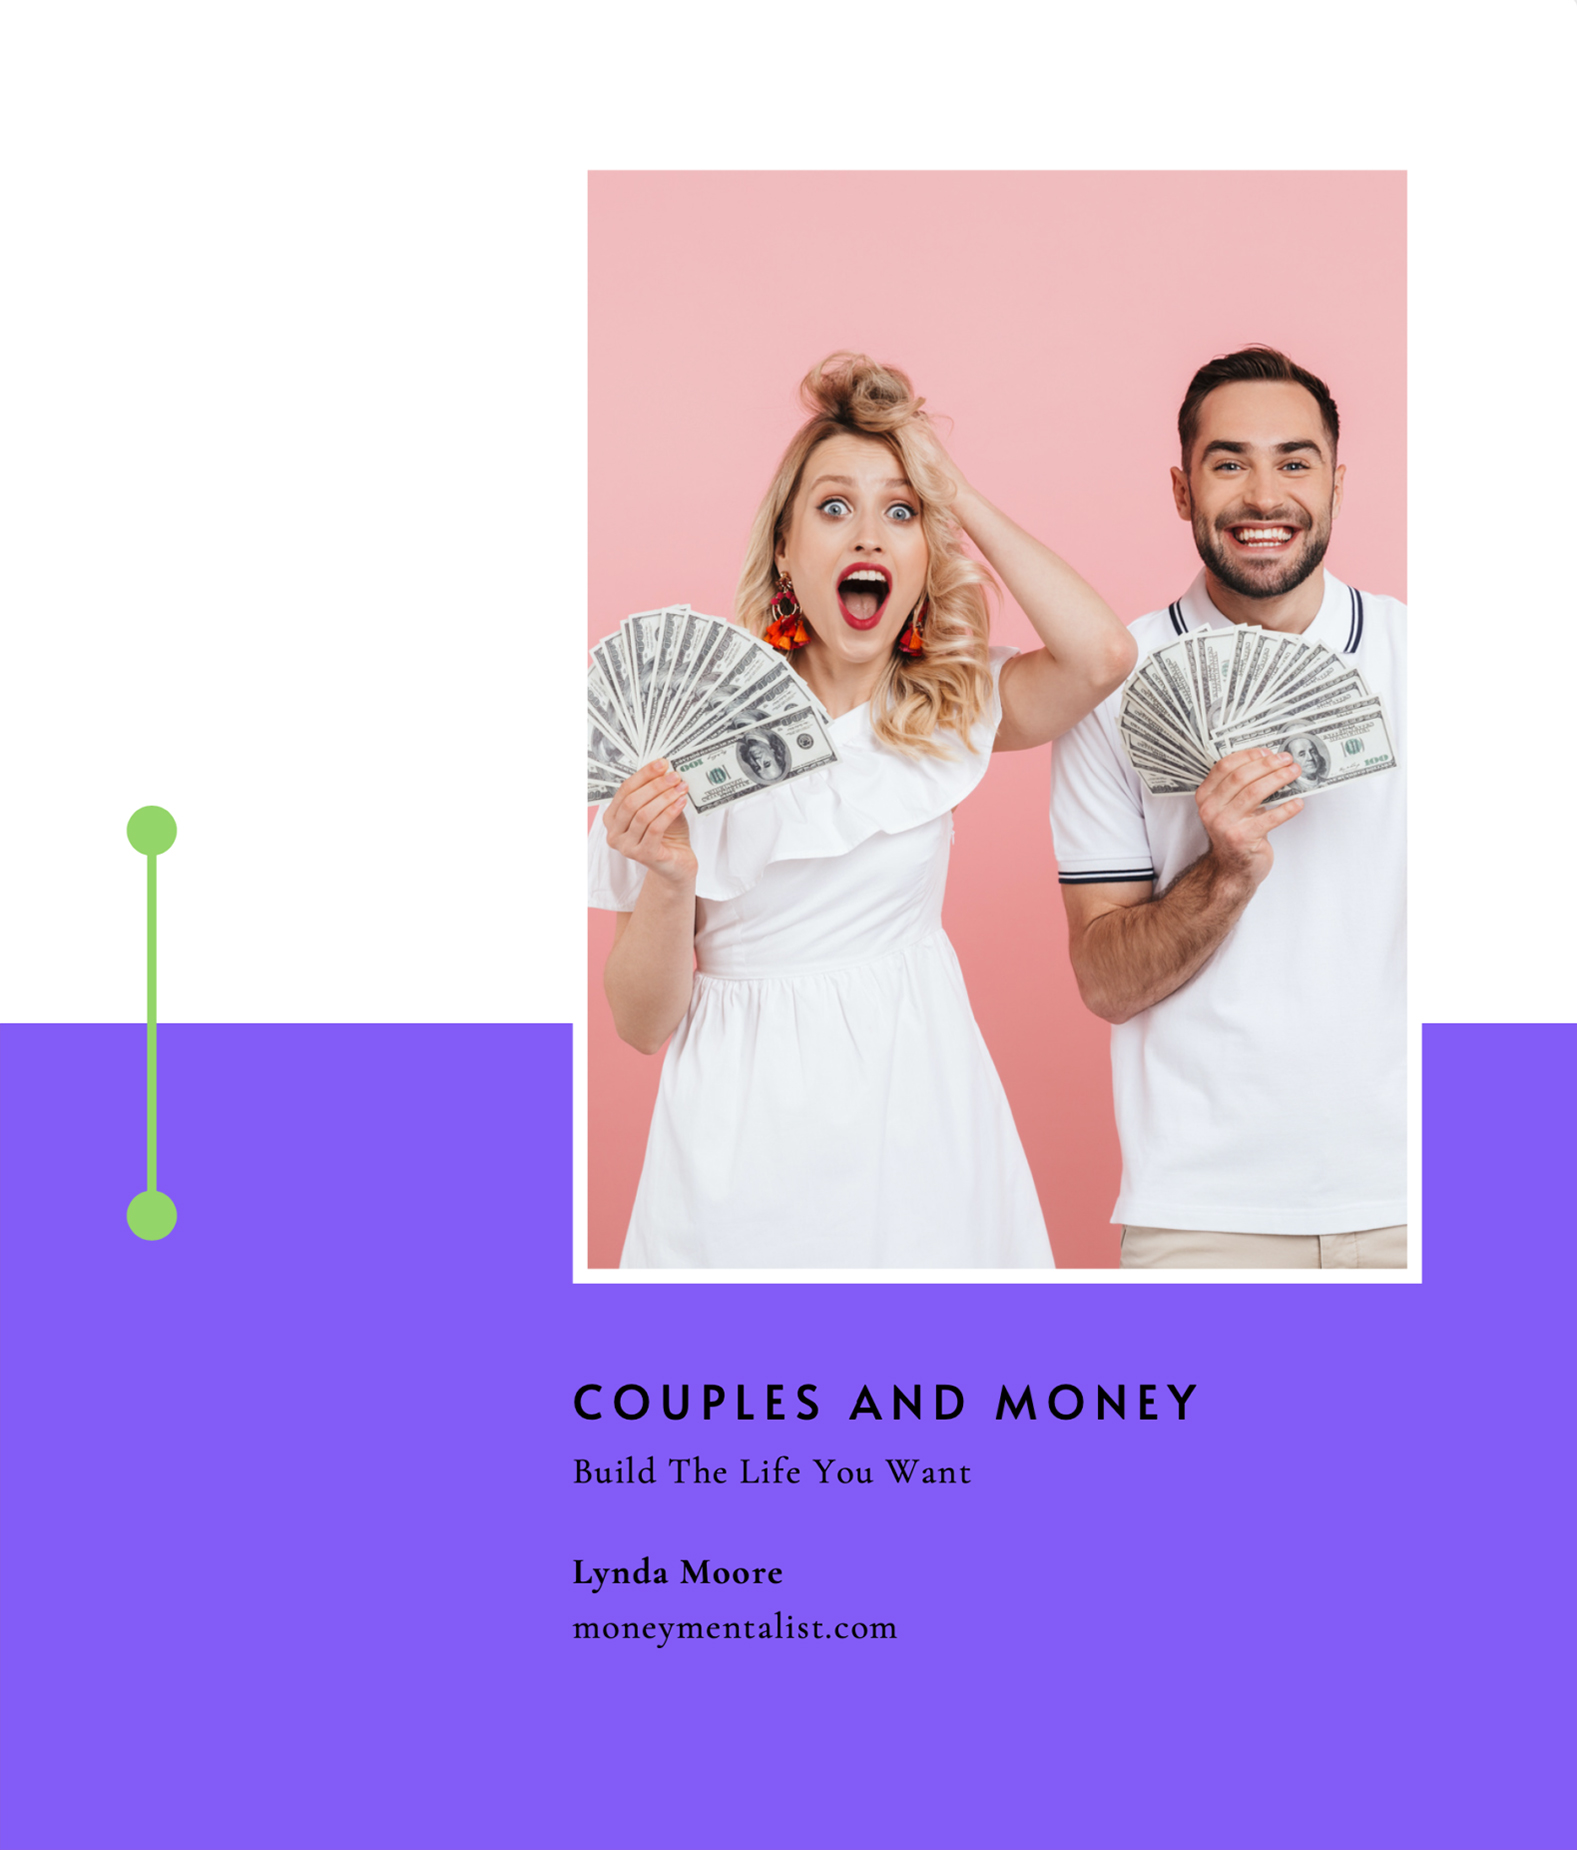 Couples and money